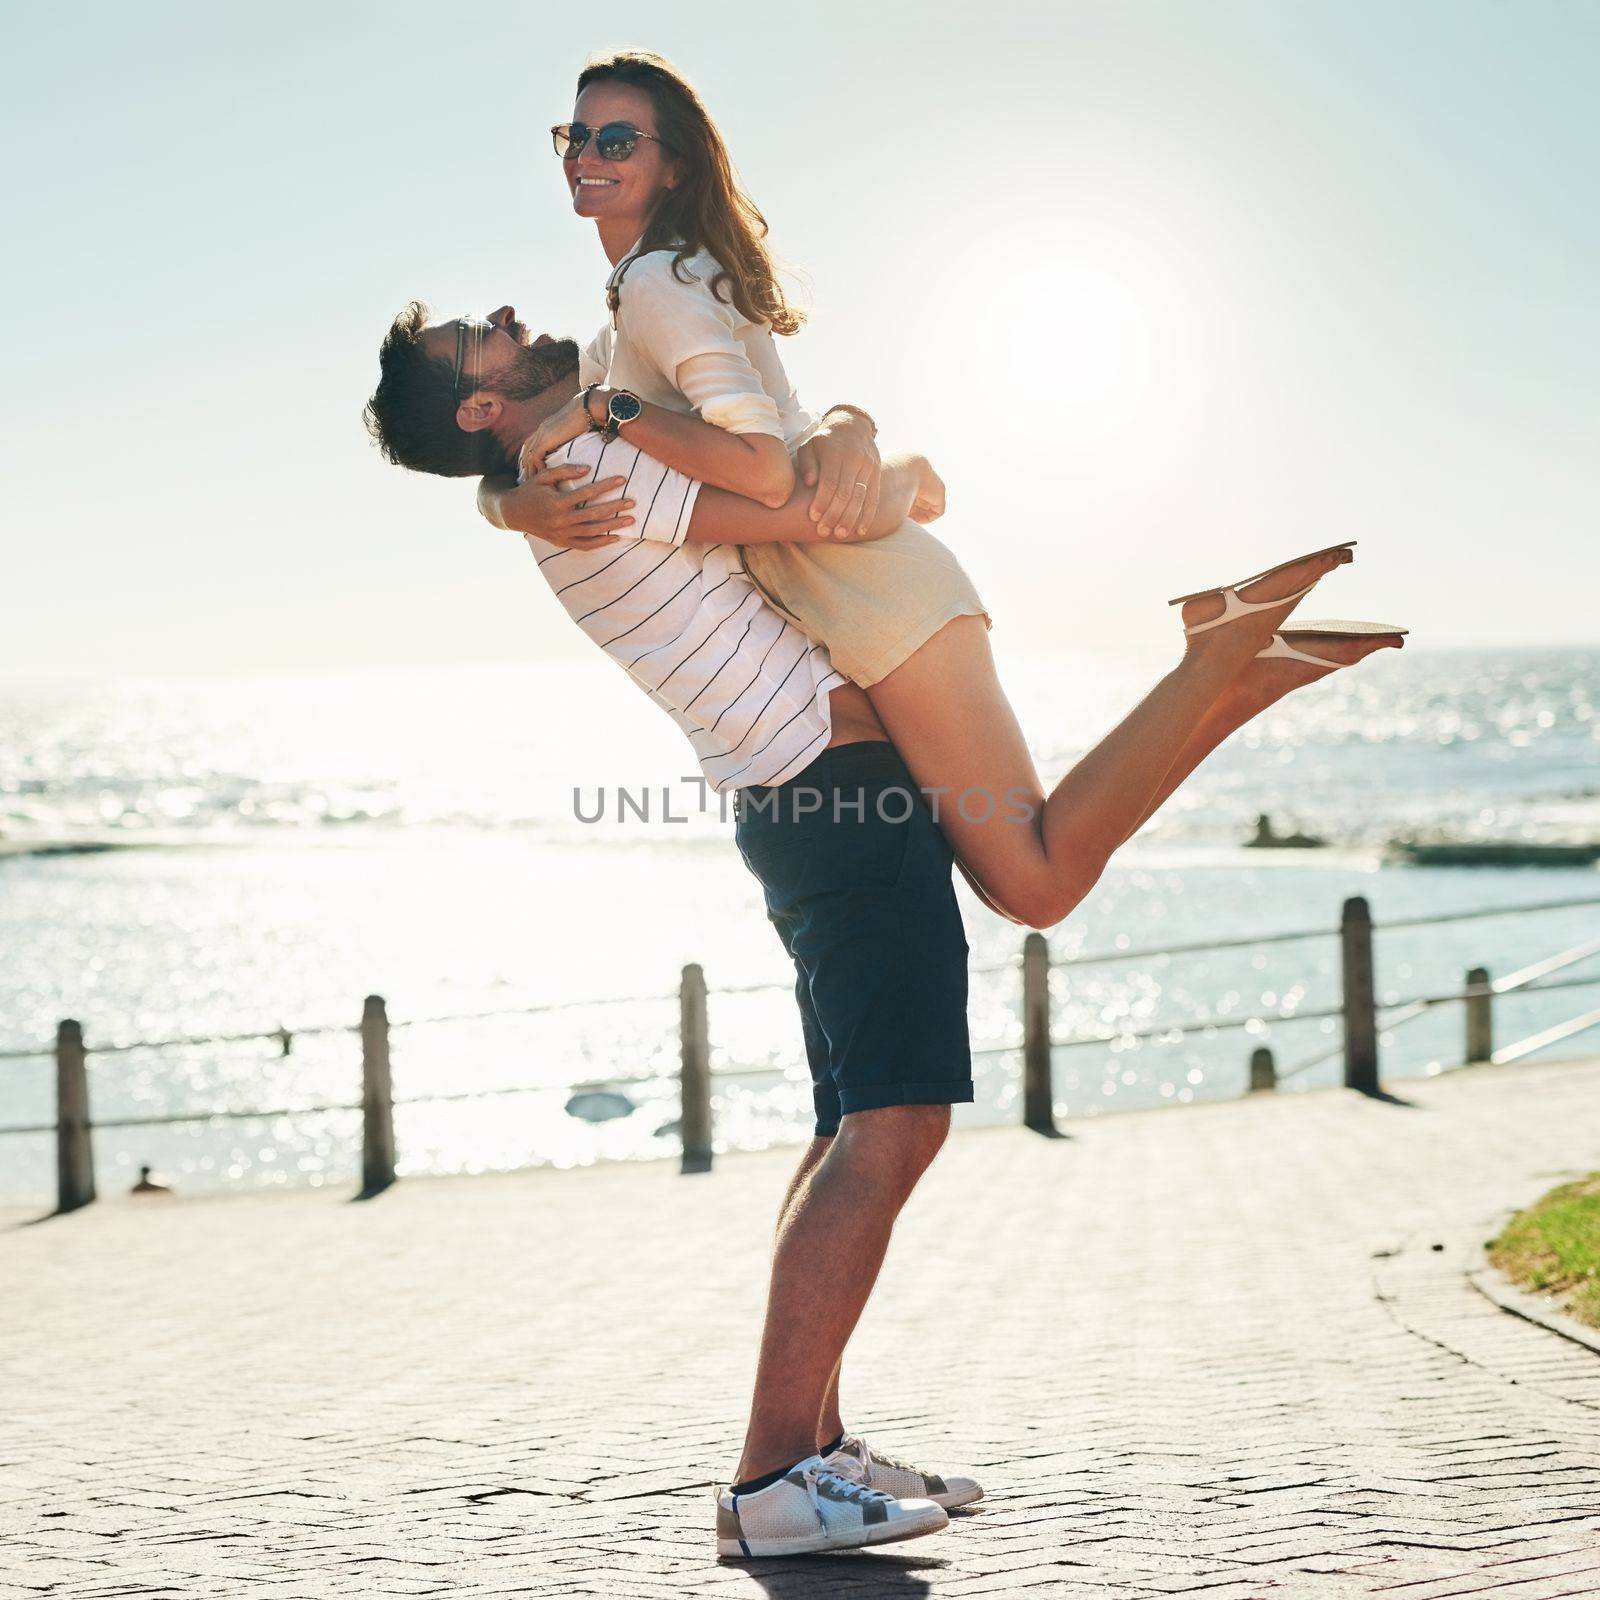 Summer romance goals. Full length shot of a happy young couple embracing on a summers day outdoors